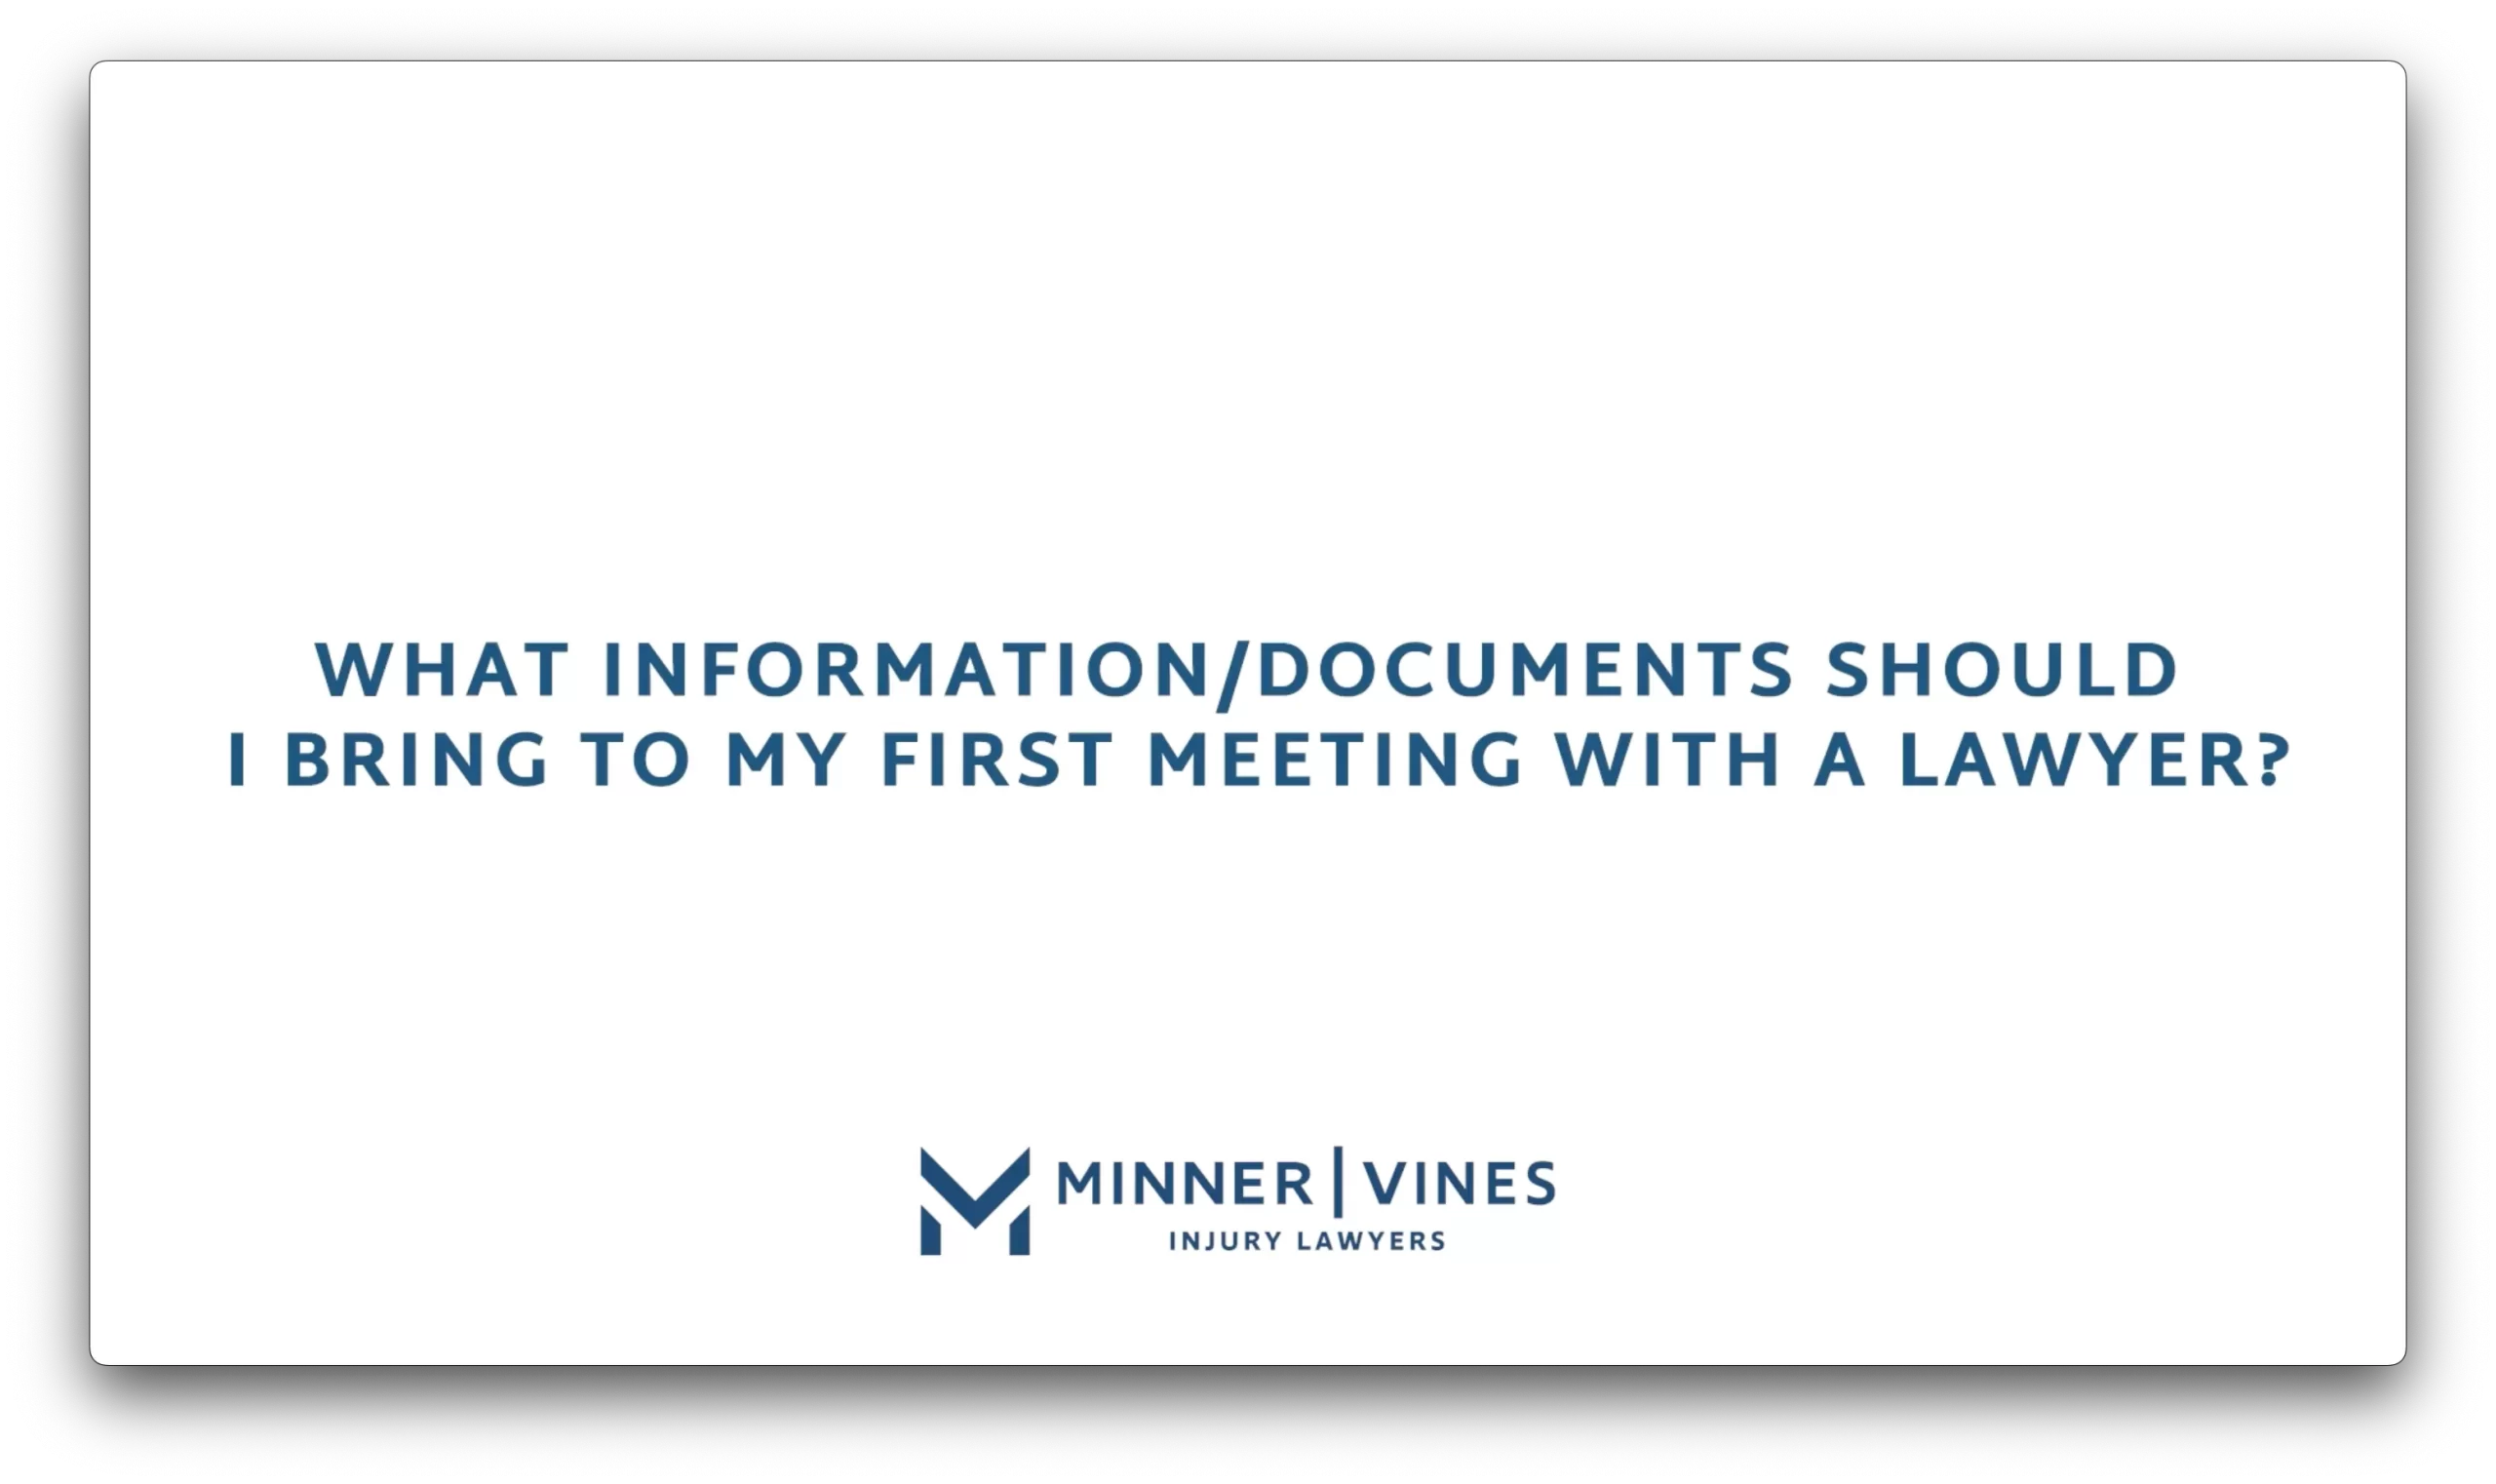 What information/documents should I bring to my first meeting with a lawyer?